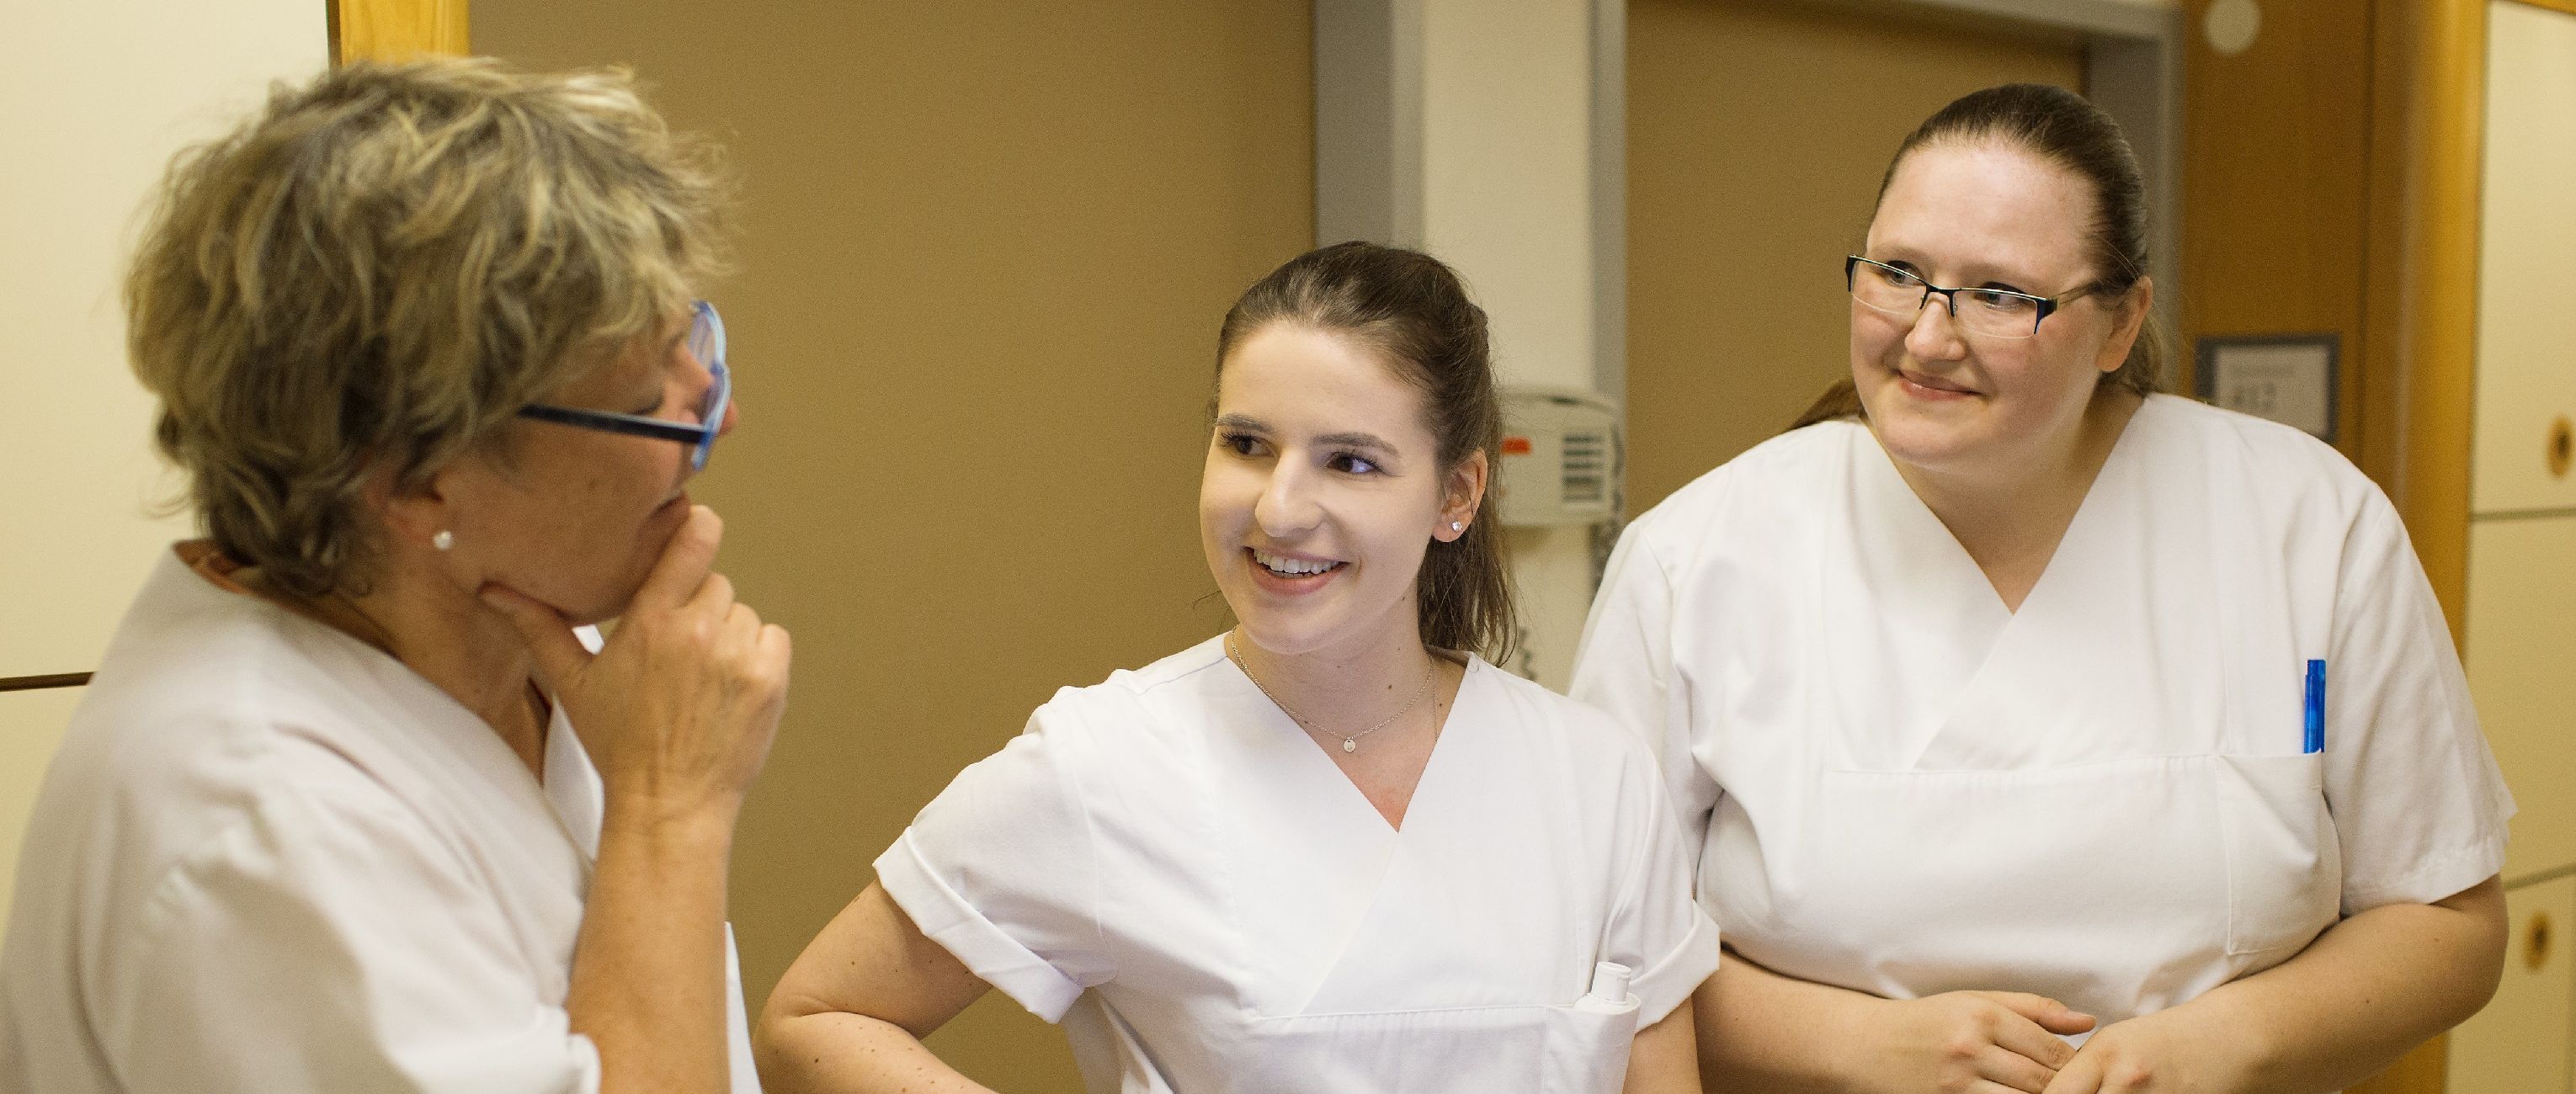 Nursing students talking to a trainer